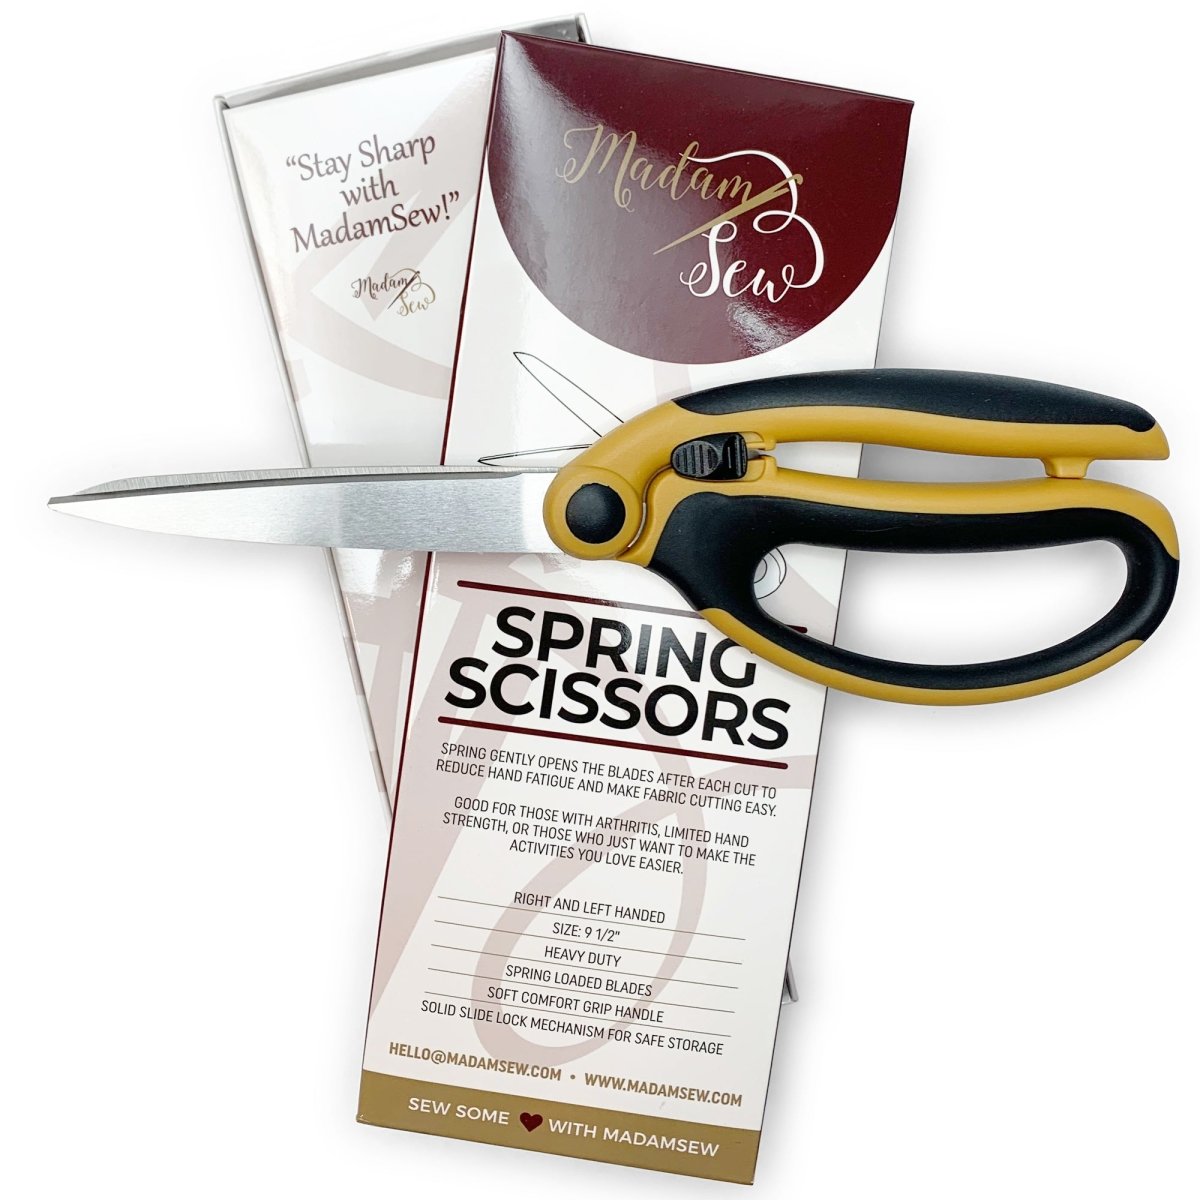 The packaging of the Madam Sew spring scissors and the spring scissors